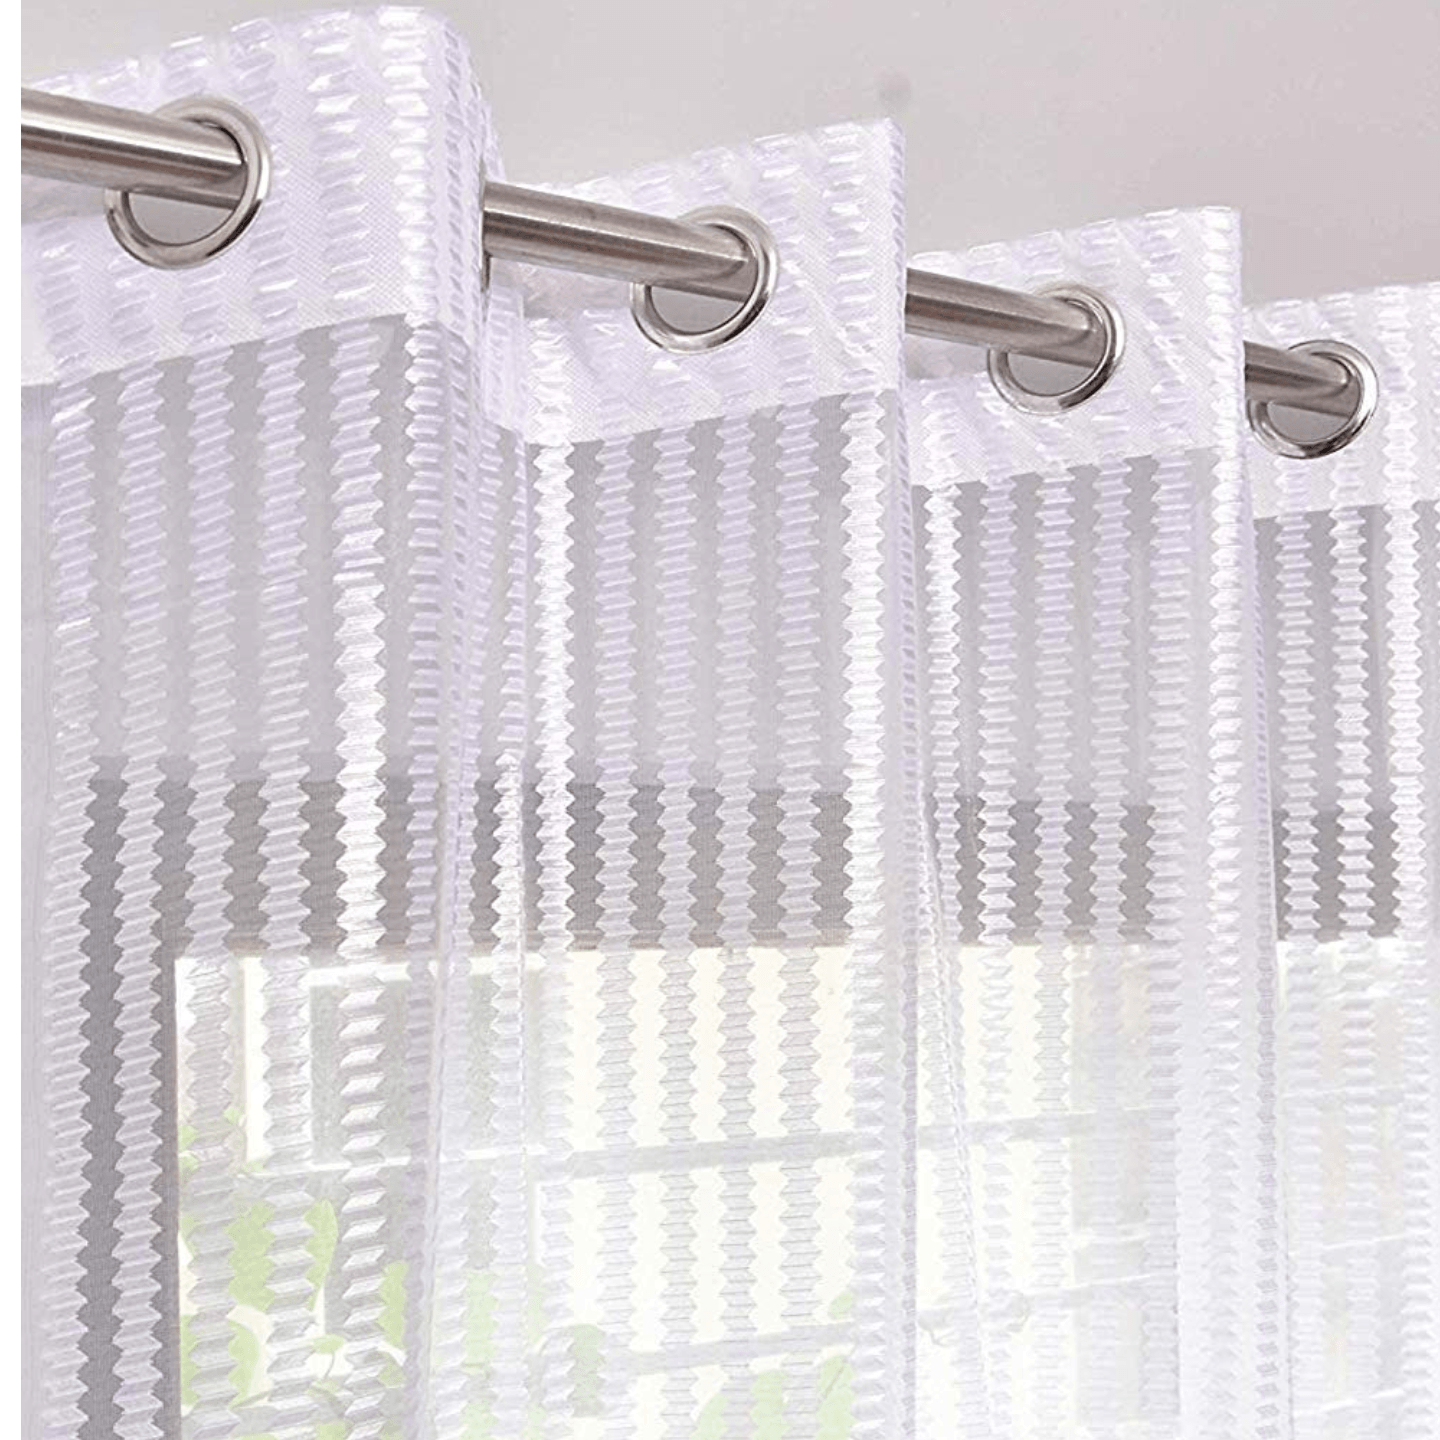 Handtex Home White Sheer Door strips Curtains set of 2pc Size-4ft x 7ft